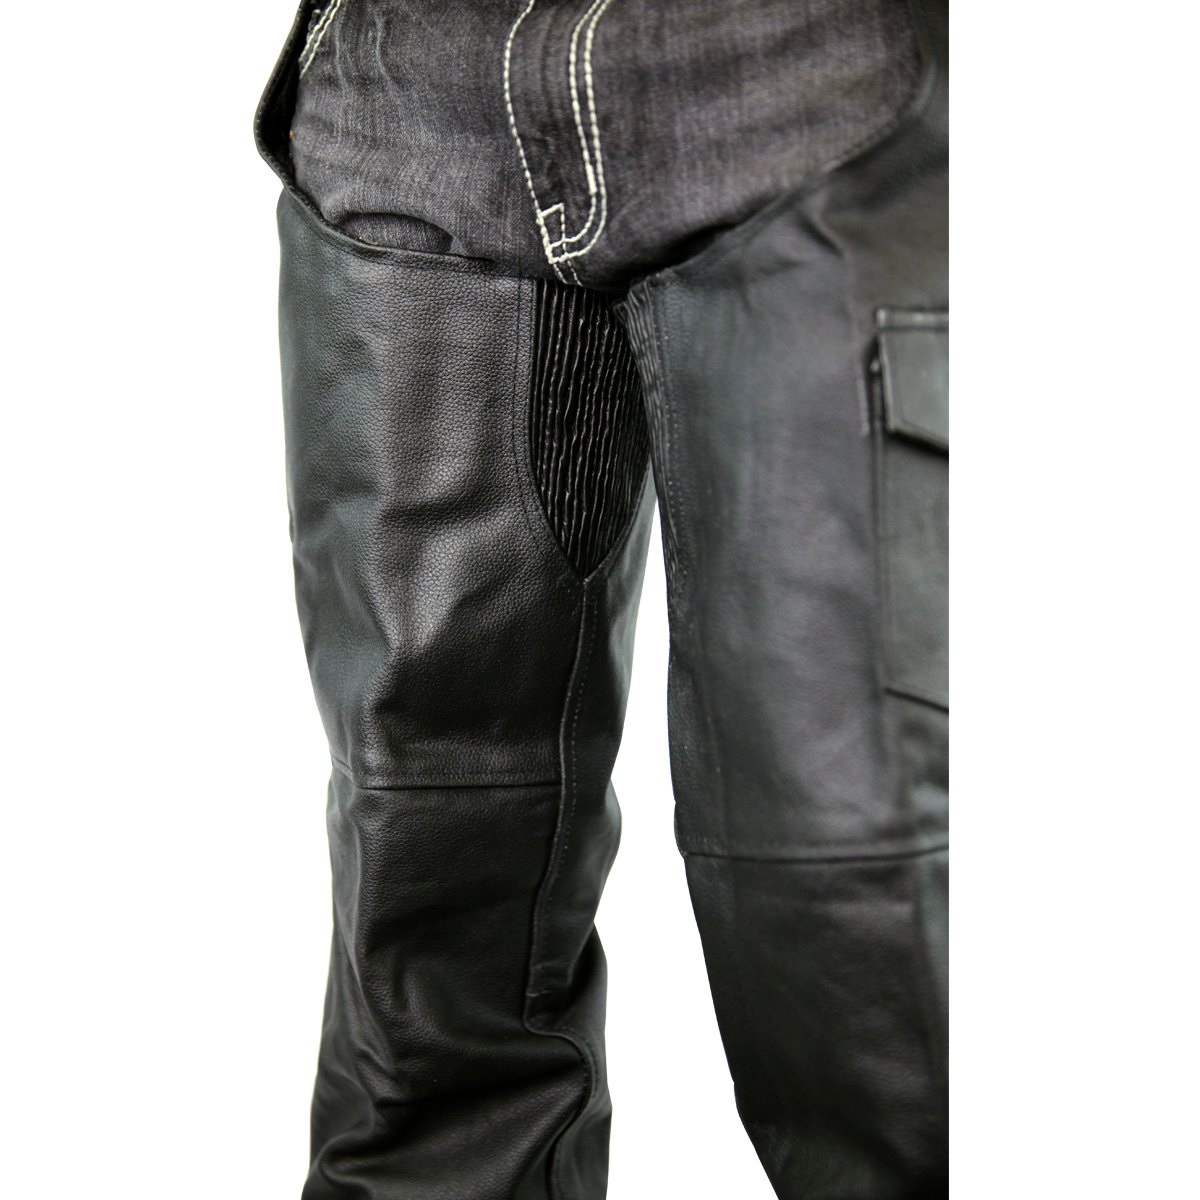 Classic Biker Leather Chaps w/ Zip-out Liner VL805 - Open Road Leather ...